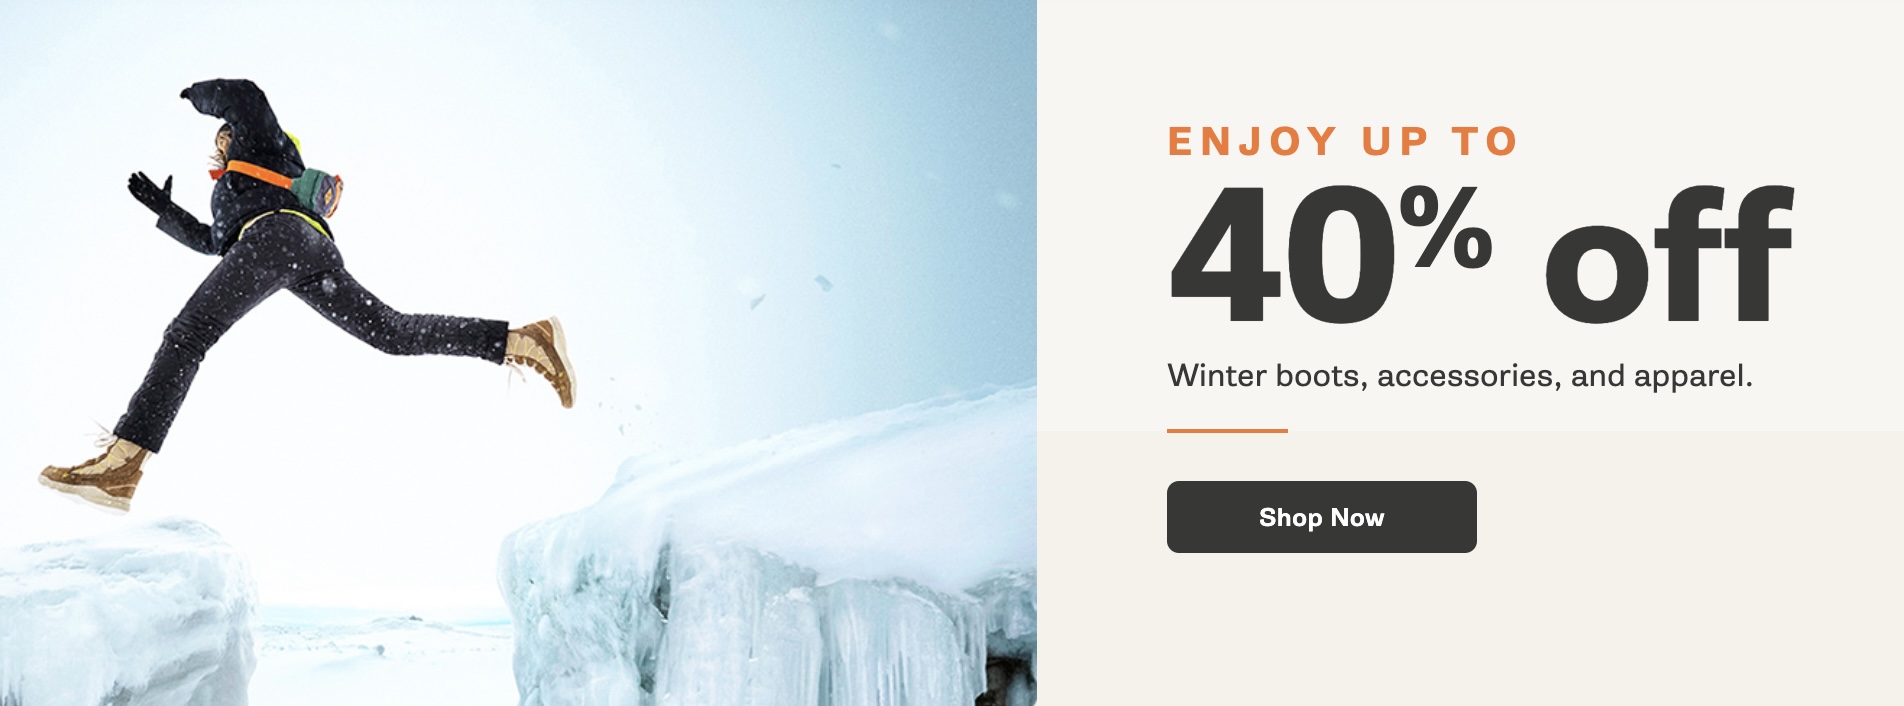 Merrell Canada Sale: Save Up to 40% OFF Winter Boots, Accessories & Apparel - Canadian Freebies, Coupons, Bargains, Flyers, Contests Canada Canadian Freebies, Coupons, Deals, Flyers, Contests Canada